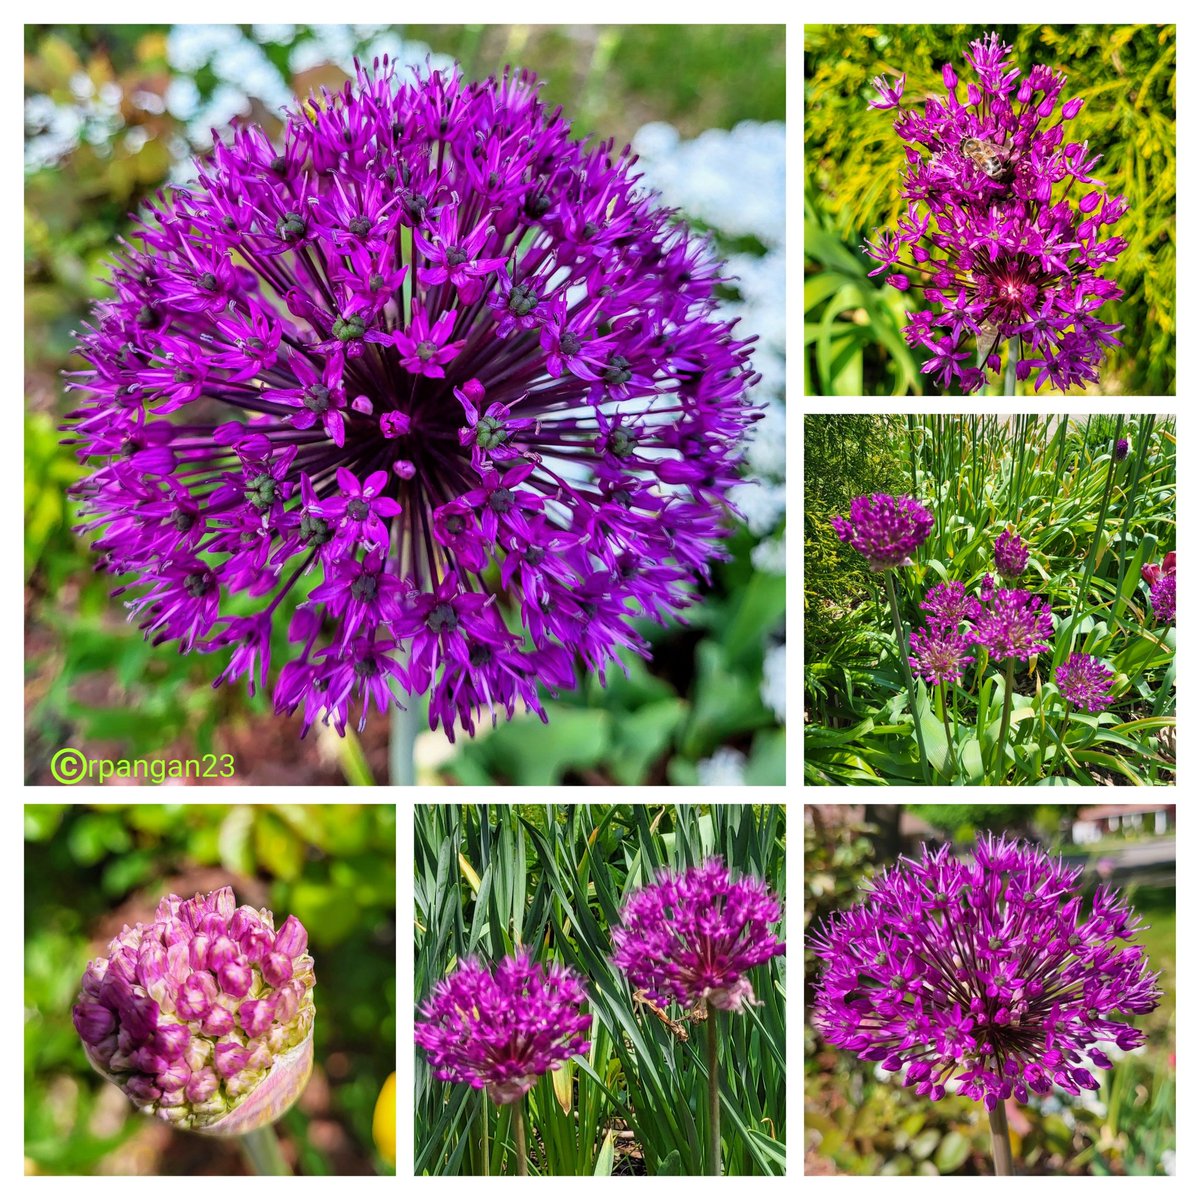 #FlowersOnFriday Its the allium's turn to shine in my garden as the tulips season is almost behind us.  Glad to see so many bees around these pink-lavender beauties which are new to my garden.🐝💜
#Flowers #springflowers #garden #GardeningTwitter #gardenshour #GardenersWorld